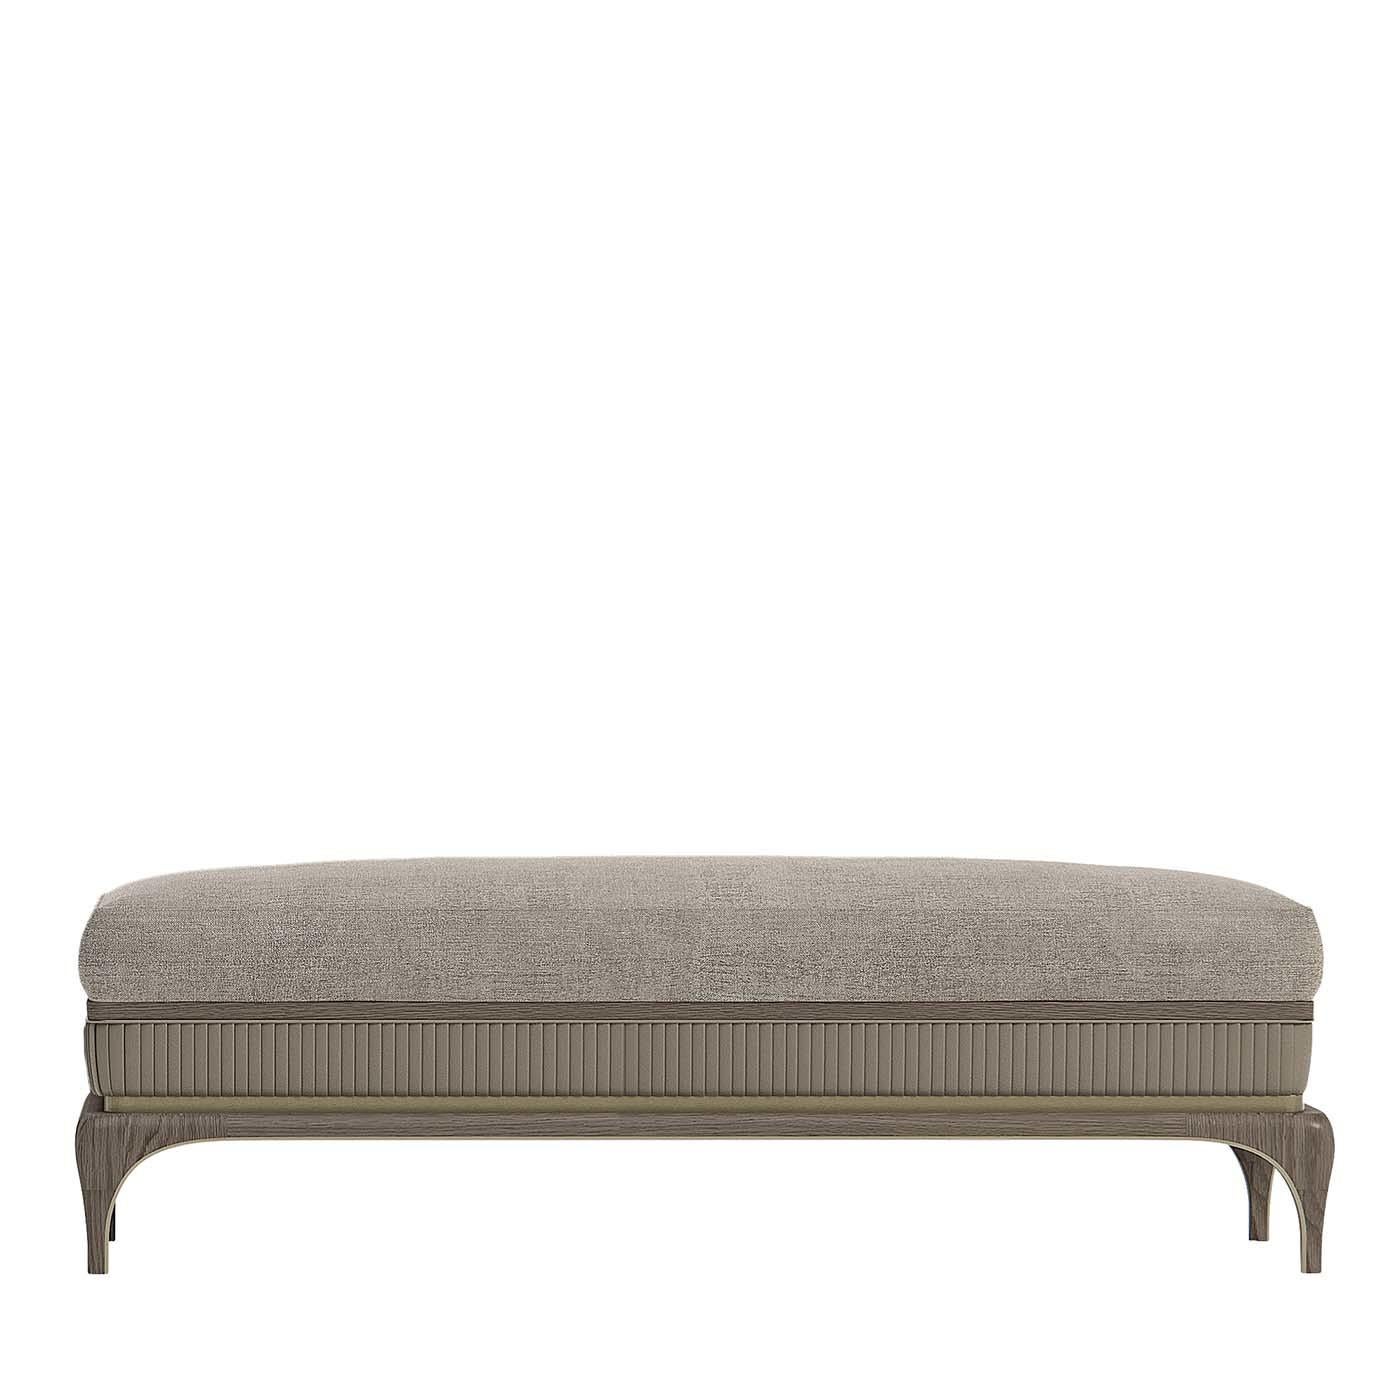 The elegance of its simplicity makes this bench a one-of-a-kind piece that will perfectly suit any modern or classic decor, infusing it with subtle sophistication. The plywood structure features a base of solid ash wood enriched with burnished brass